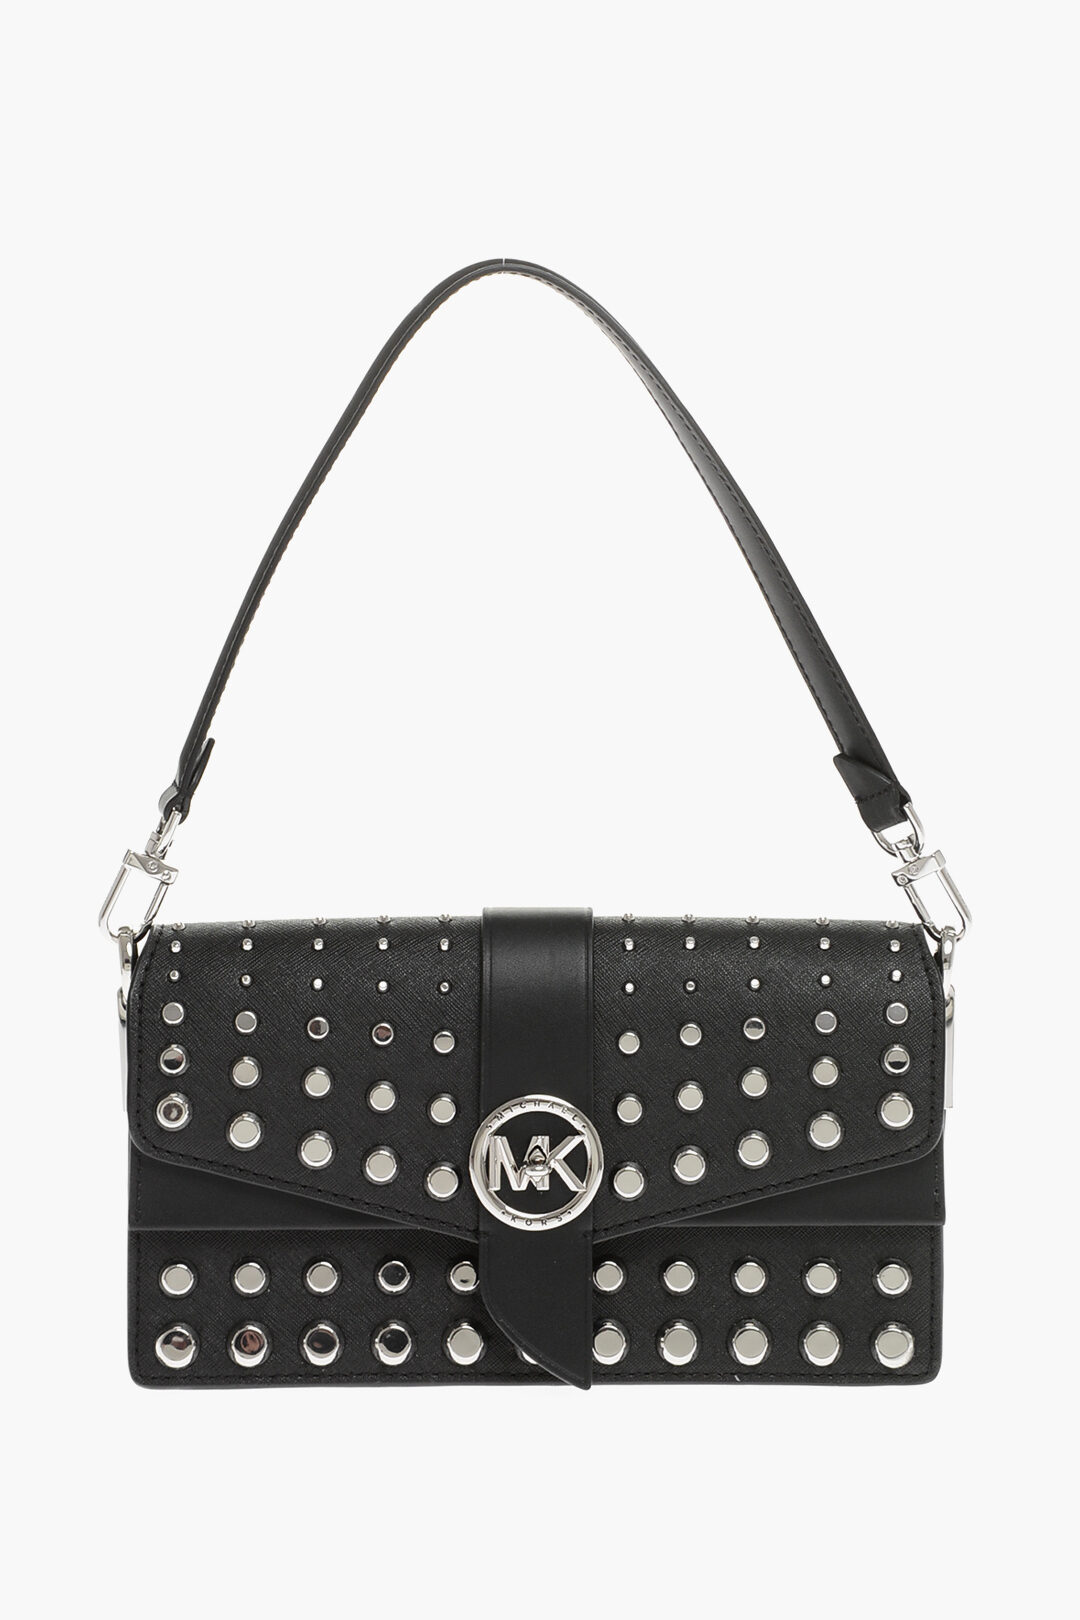 Michael Kors Borsa a Tracolla in Pelle con Borchie donna - Glamood Outlet